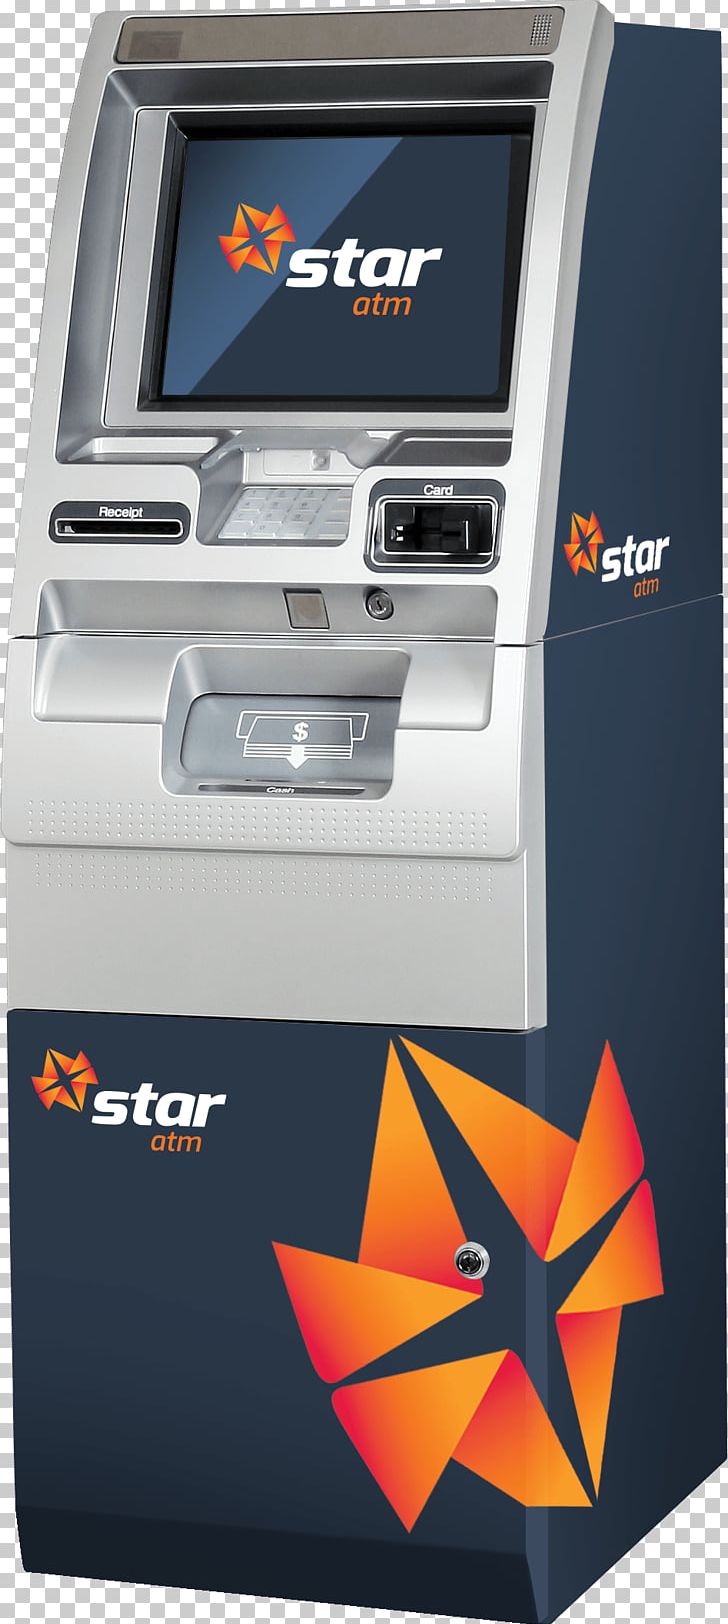 Automated Teller Machine STAR Bitcoin ATM Bank Icash Payment Systems PNG, Clipart, Atm, Atm Card, Atm Usage Fees, Automated Teller Machine, Bank Free PNG Download